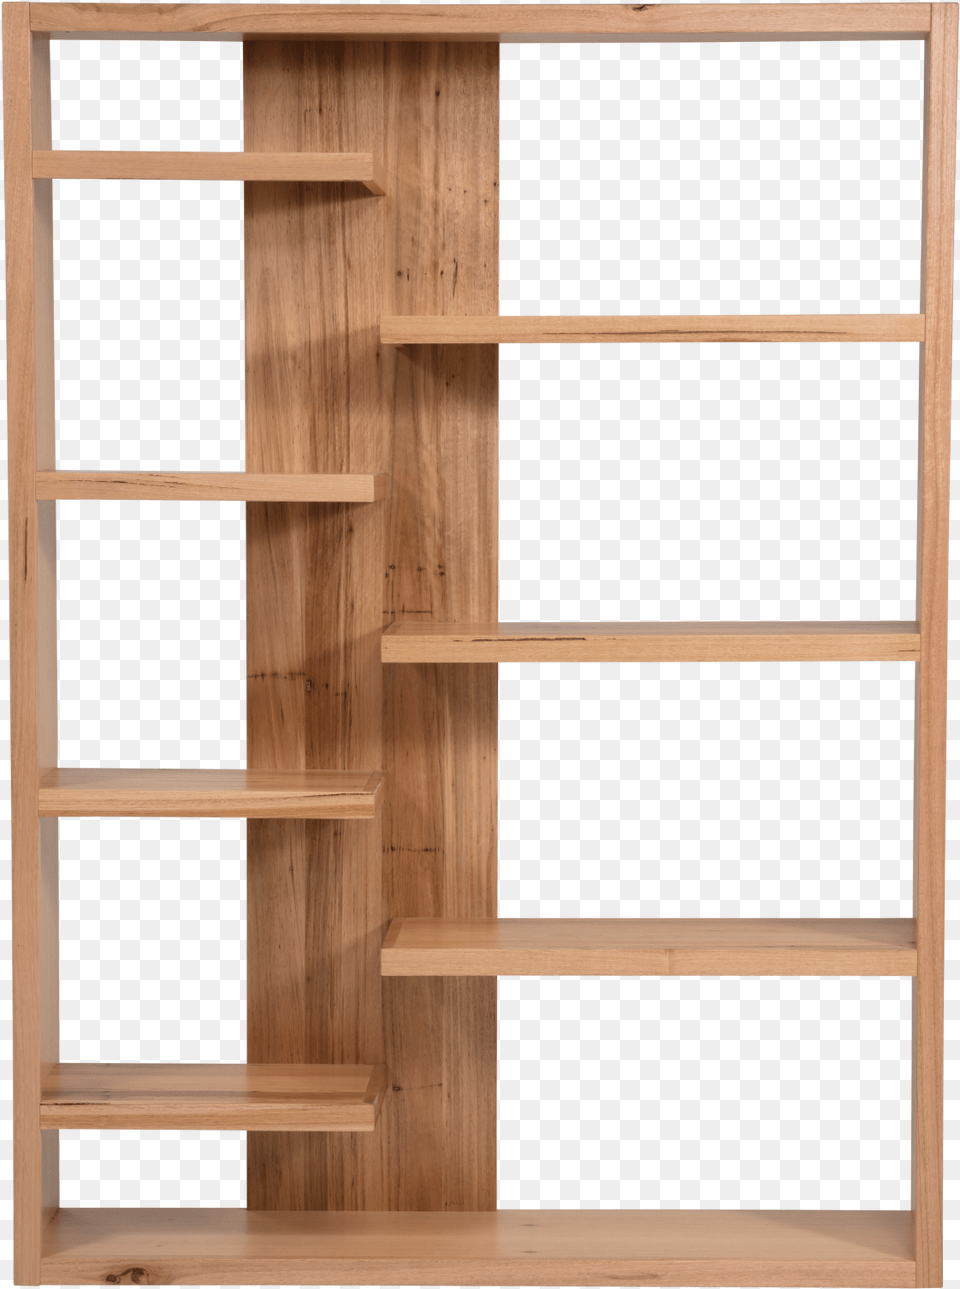 Image Not Available Shelf, Closet, Cupboard, Furniture, Wood Png